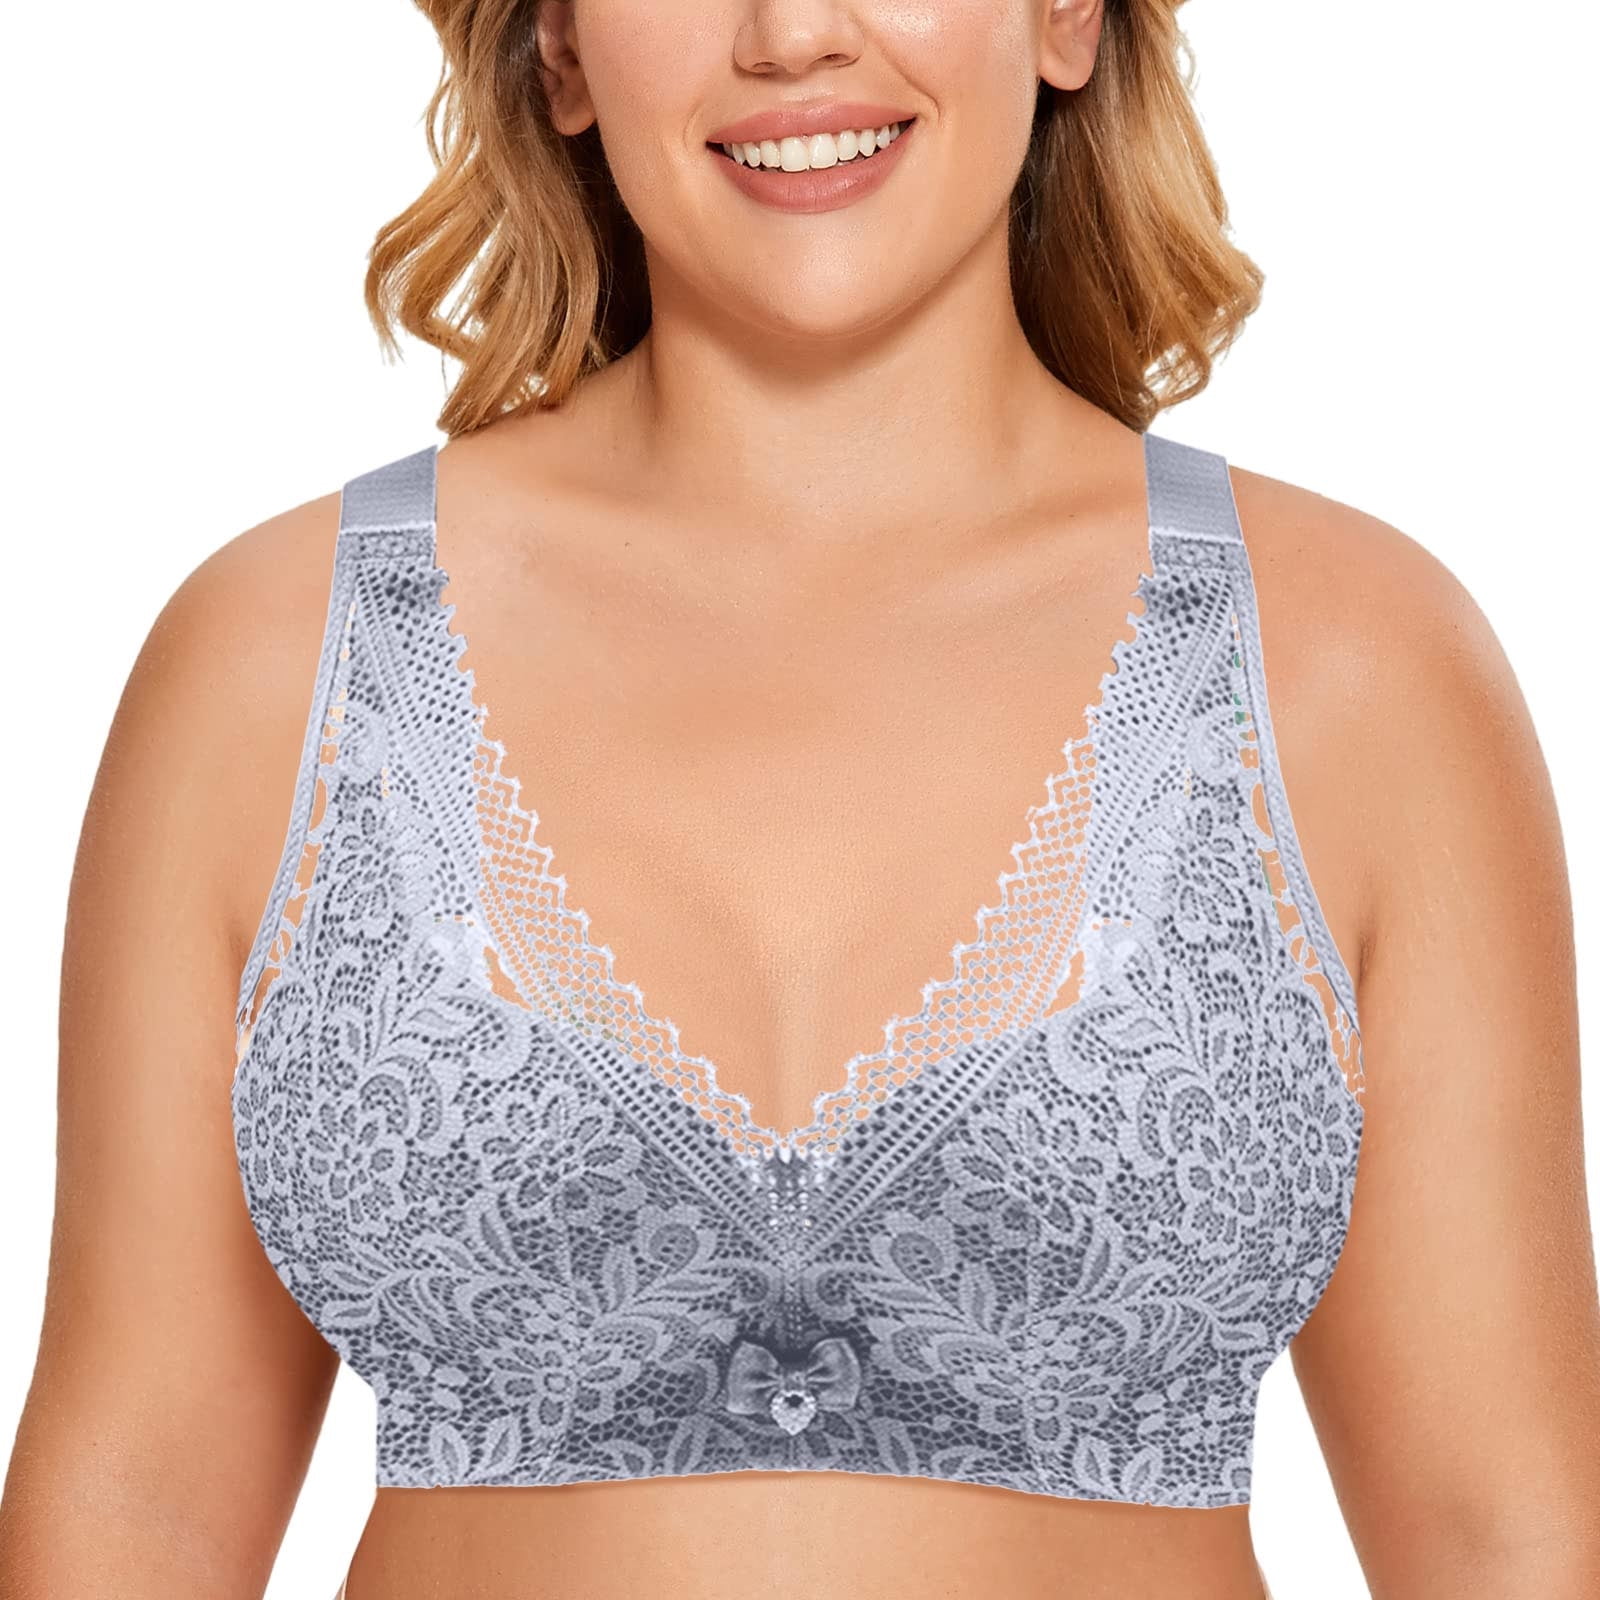 TOWED22 Plus Size Bras,Women's High Impact Removable Pads Sports Bra  Underwire Full Coverage Support Workout Running Bra,Grey 